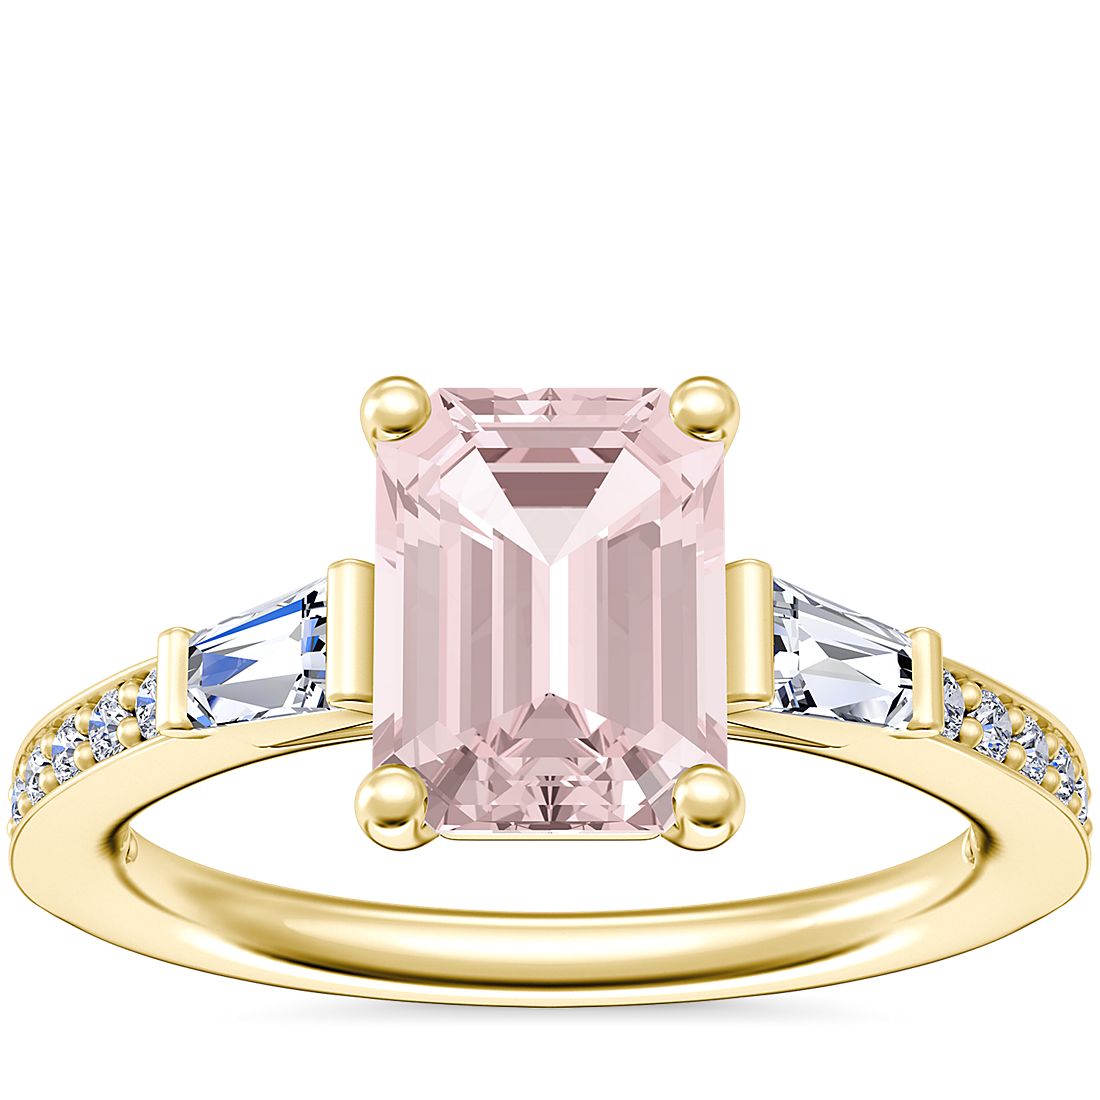 Tapered Baguette Diamond Cathedral Engagement Ring with Emerald-Cut Morganite in 14k Yellow Gold (8x6mm)